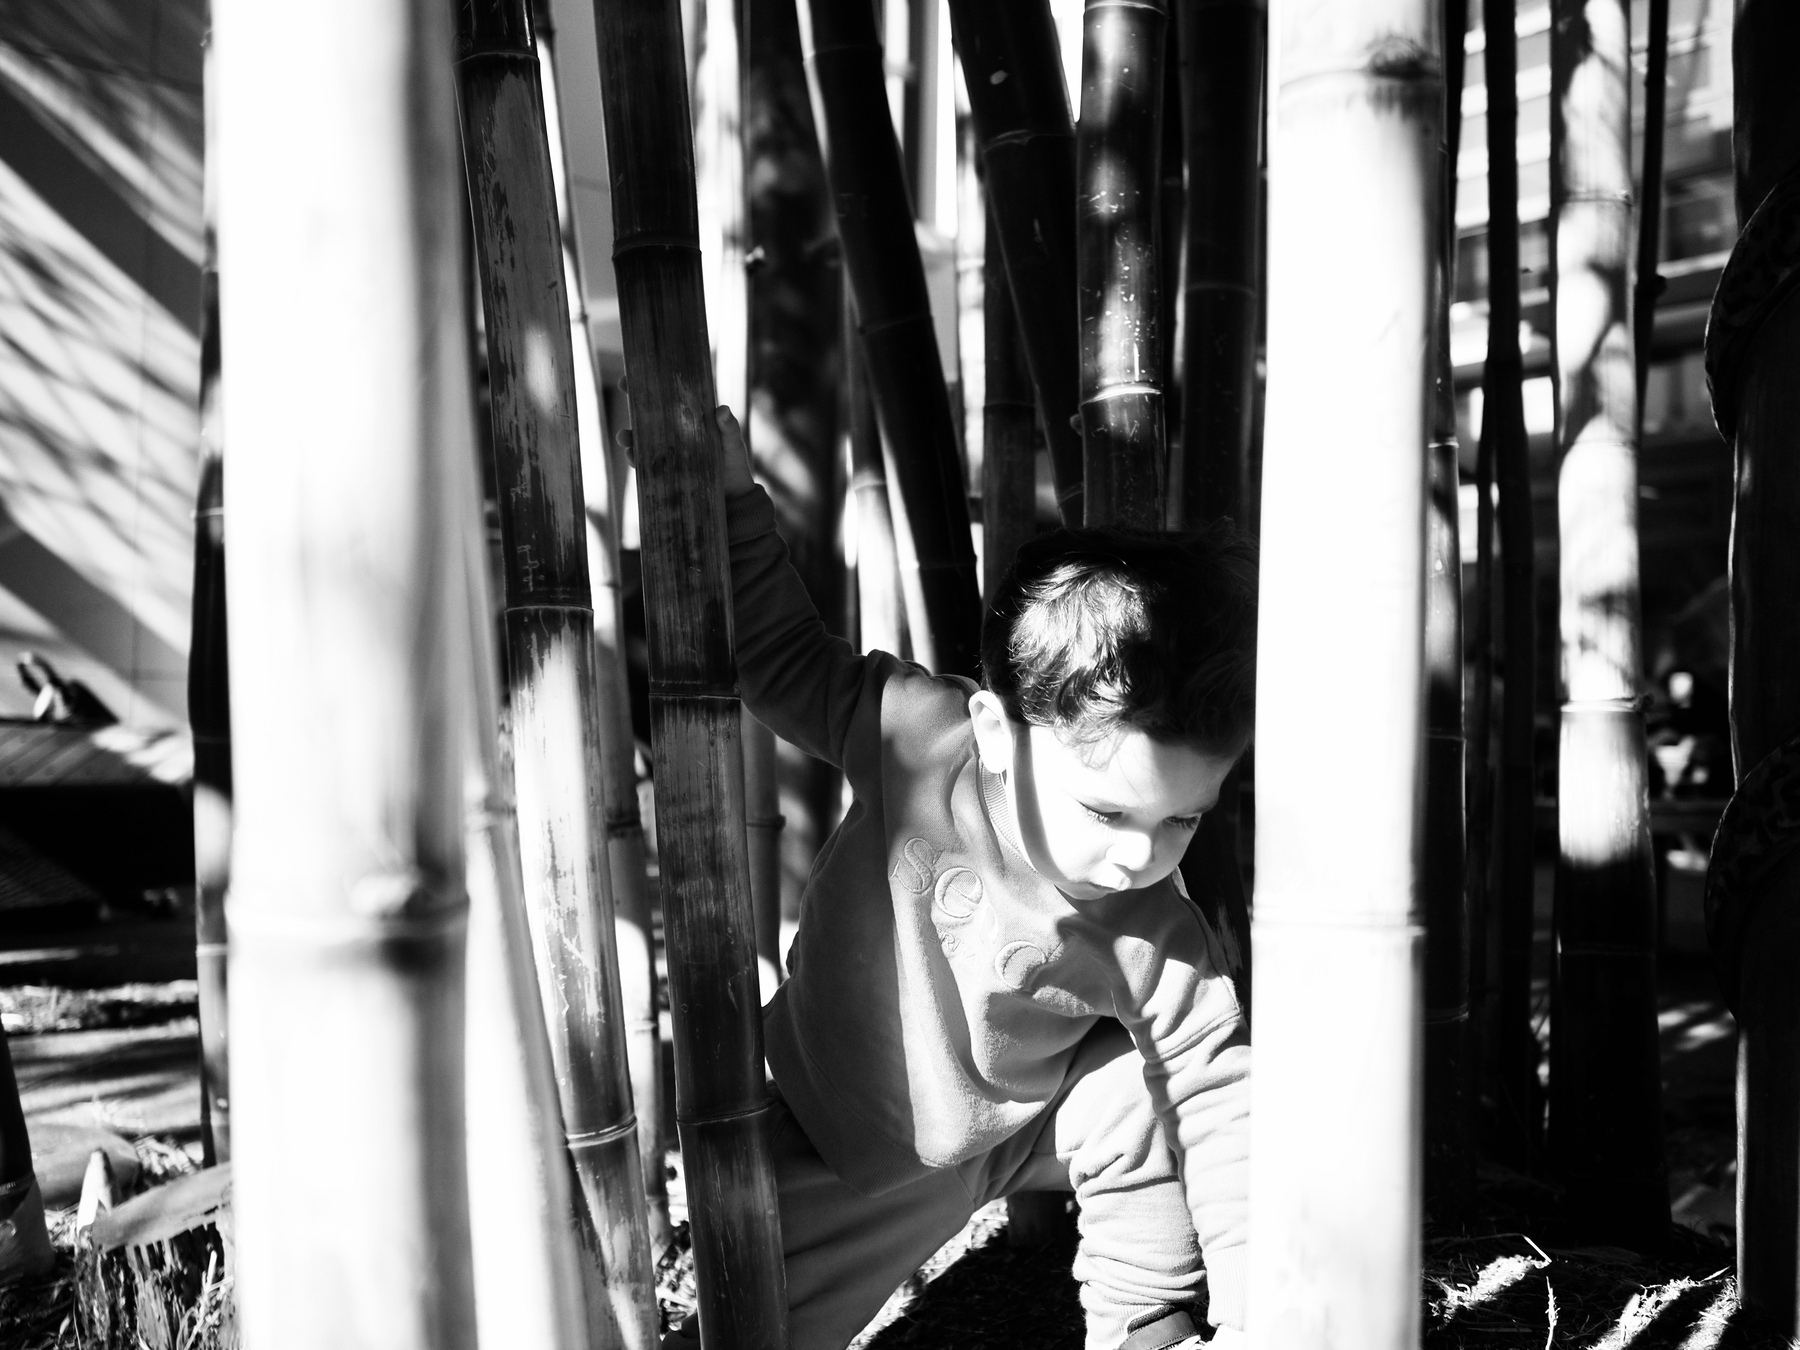 A black-and-white image of a toddler squeezing through bamboo